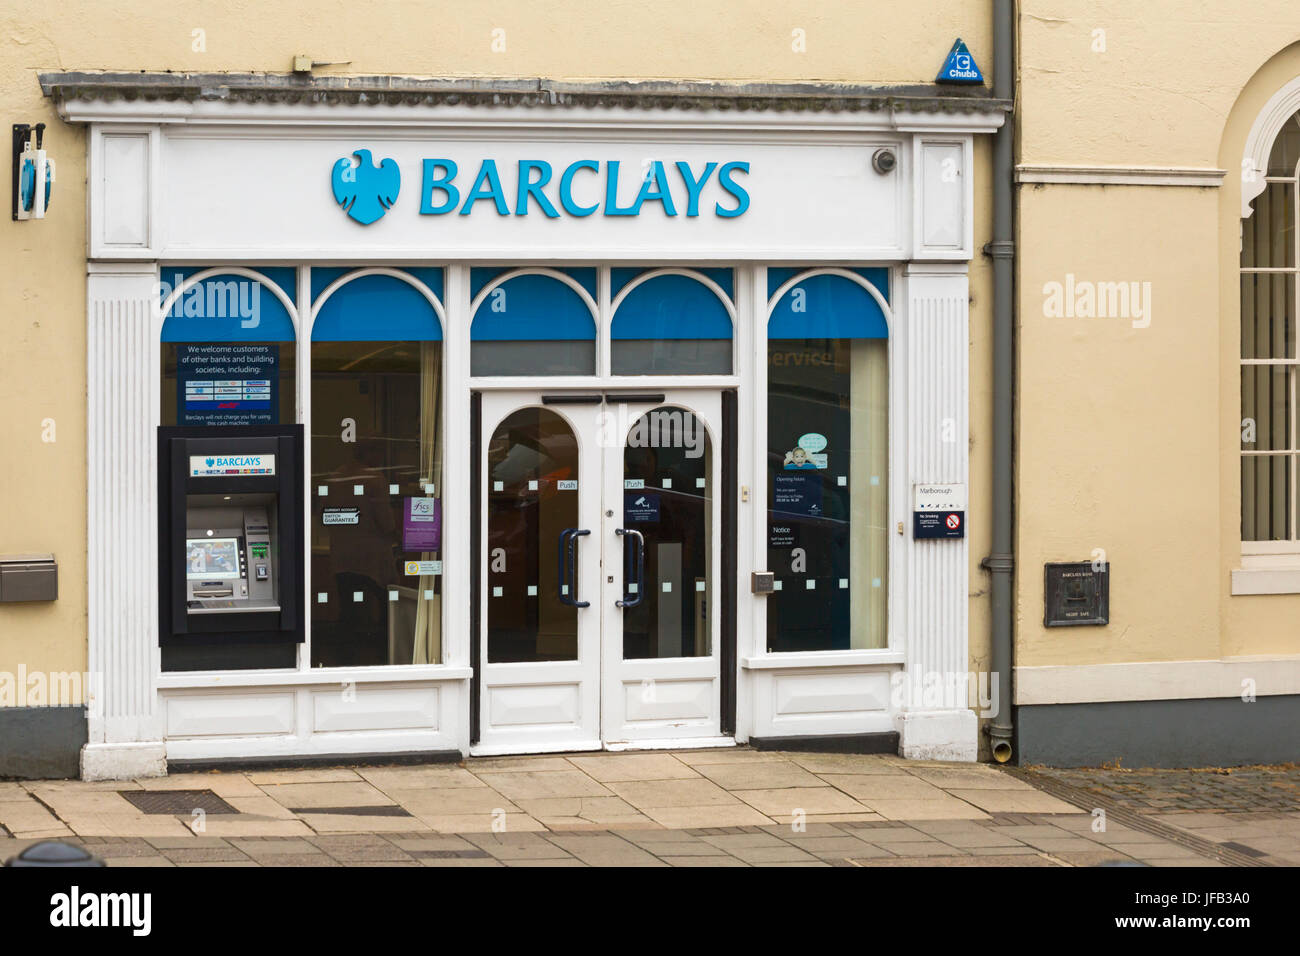 Barclays Bank exterior in High Street at Marlborough, Wiltshire UK in June Stock Photo